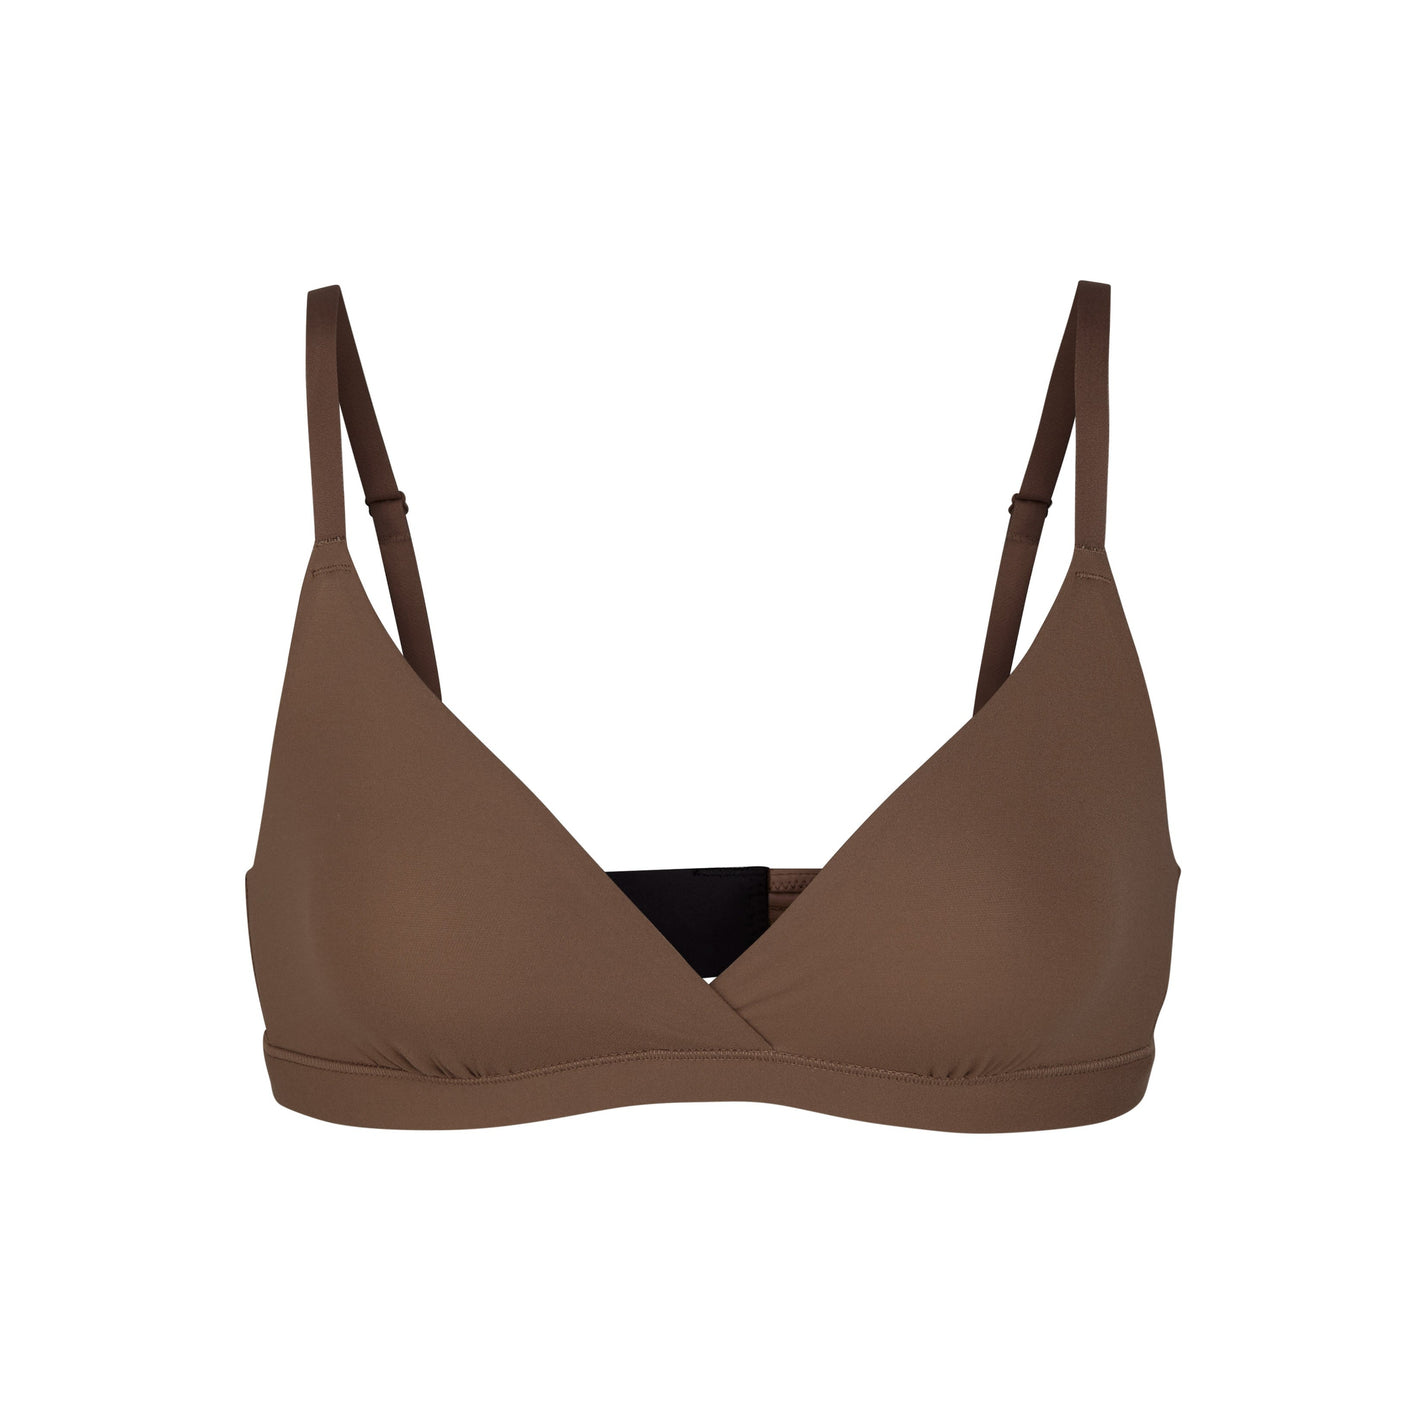 https://cdn.shopify.com/s/files/1/0259/5448/4284/products/SKIMS-BRAS-BR-TRI-0235-OXD-FL_291ba47c-4c23-40e8-b2ec-3ac25e58557e.jpg?v=1621633976&width=1410&height=1410